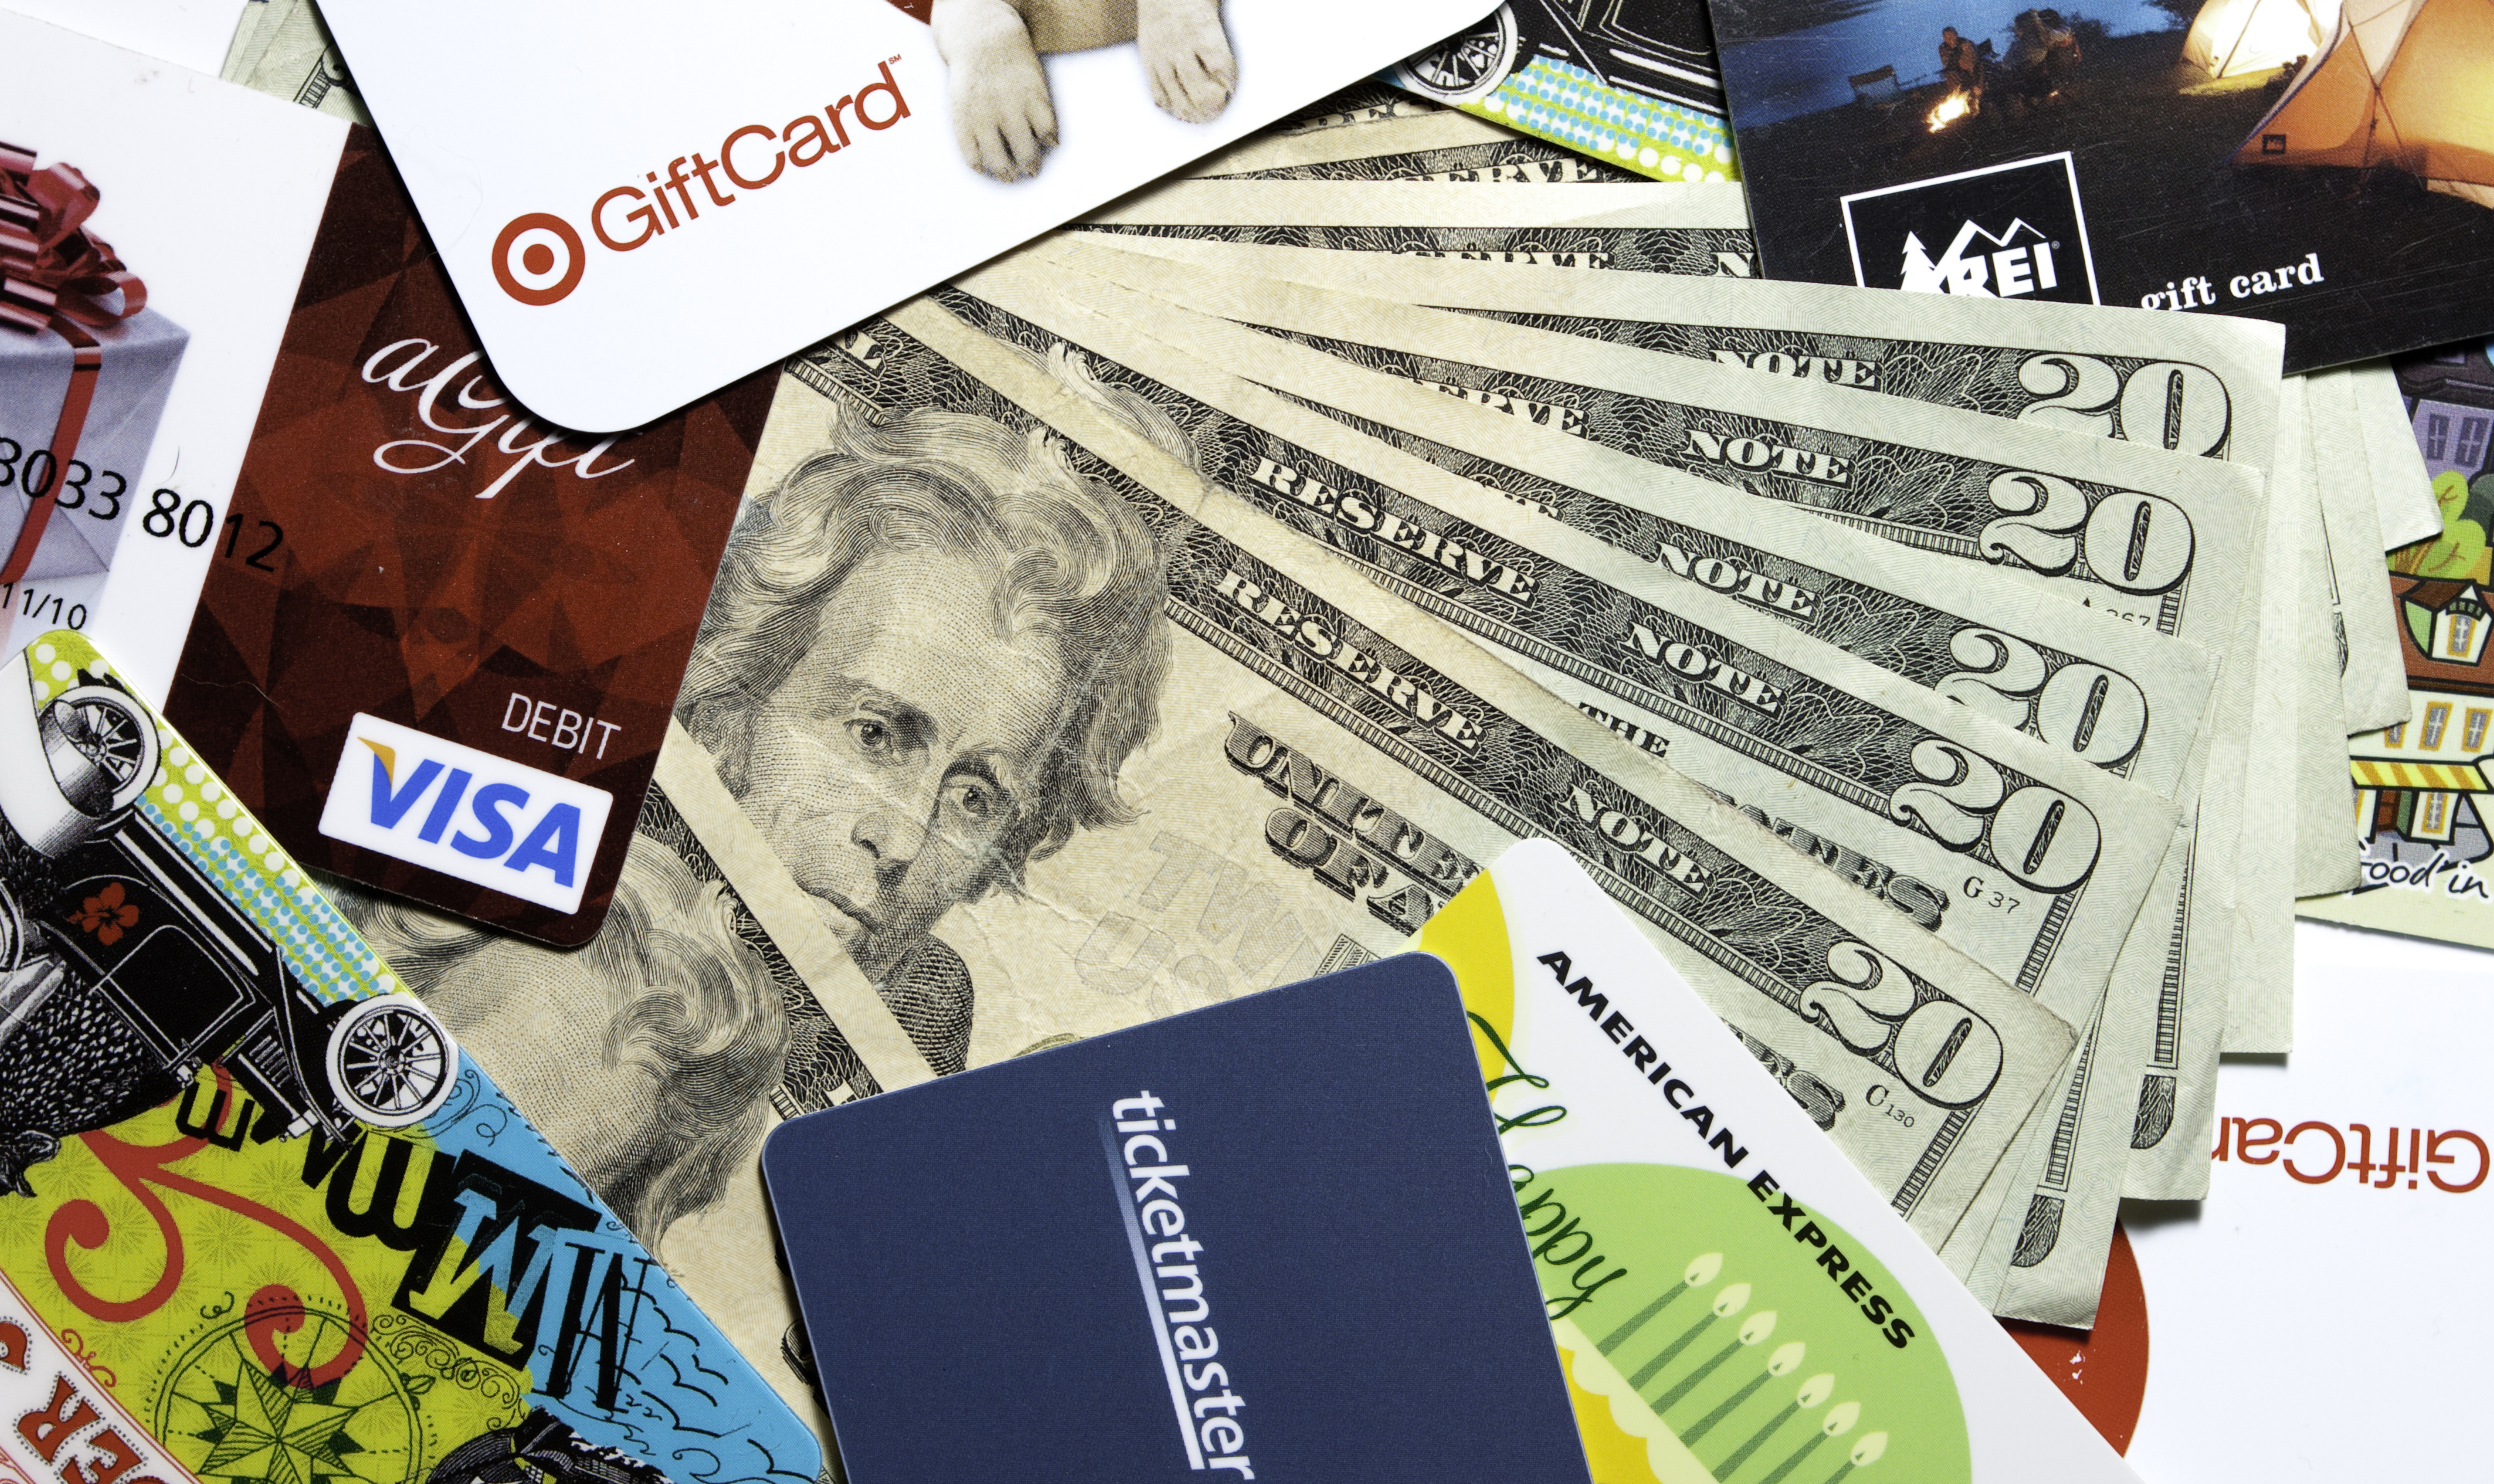 How To Sell And Exchange Unwanted Gift Cards For Cash Money